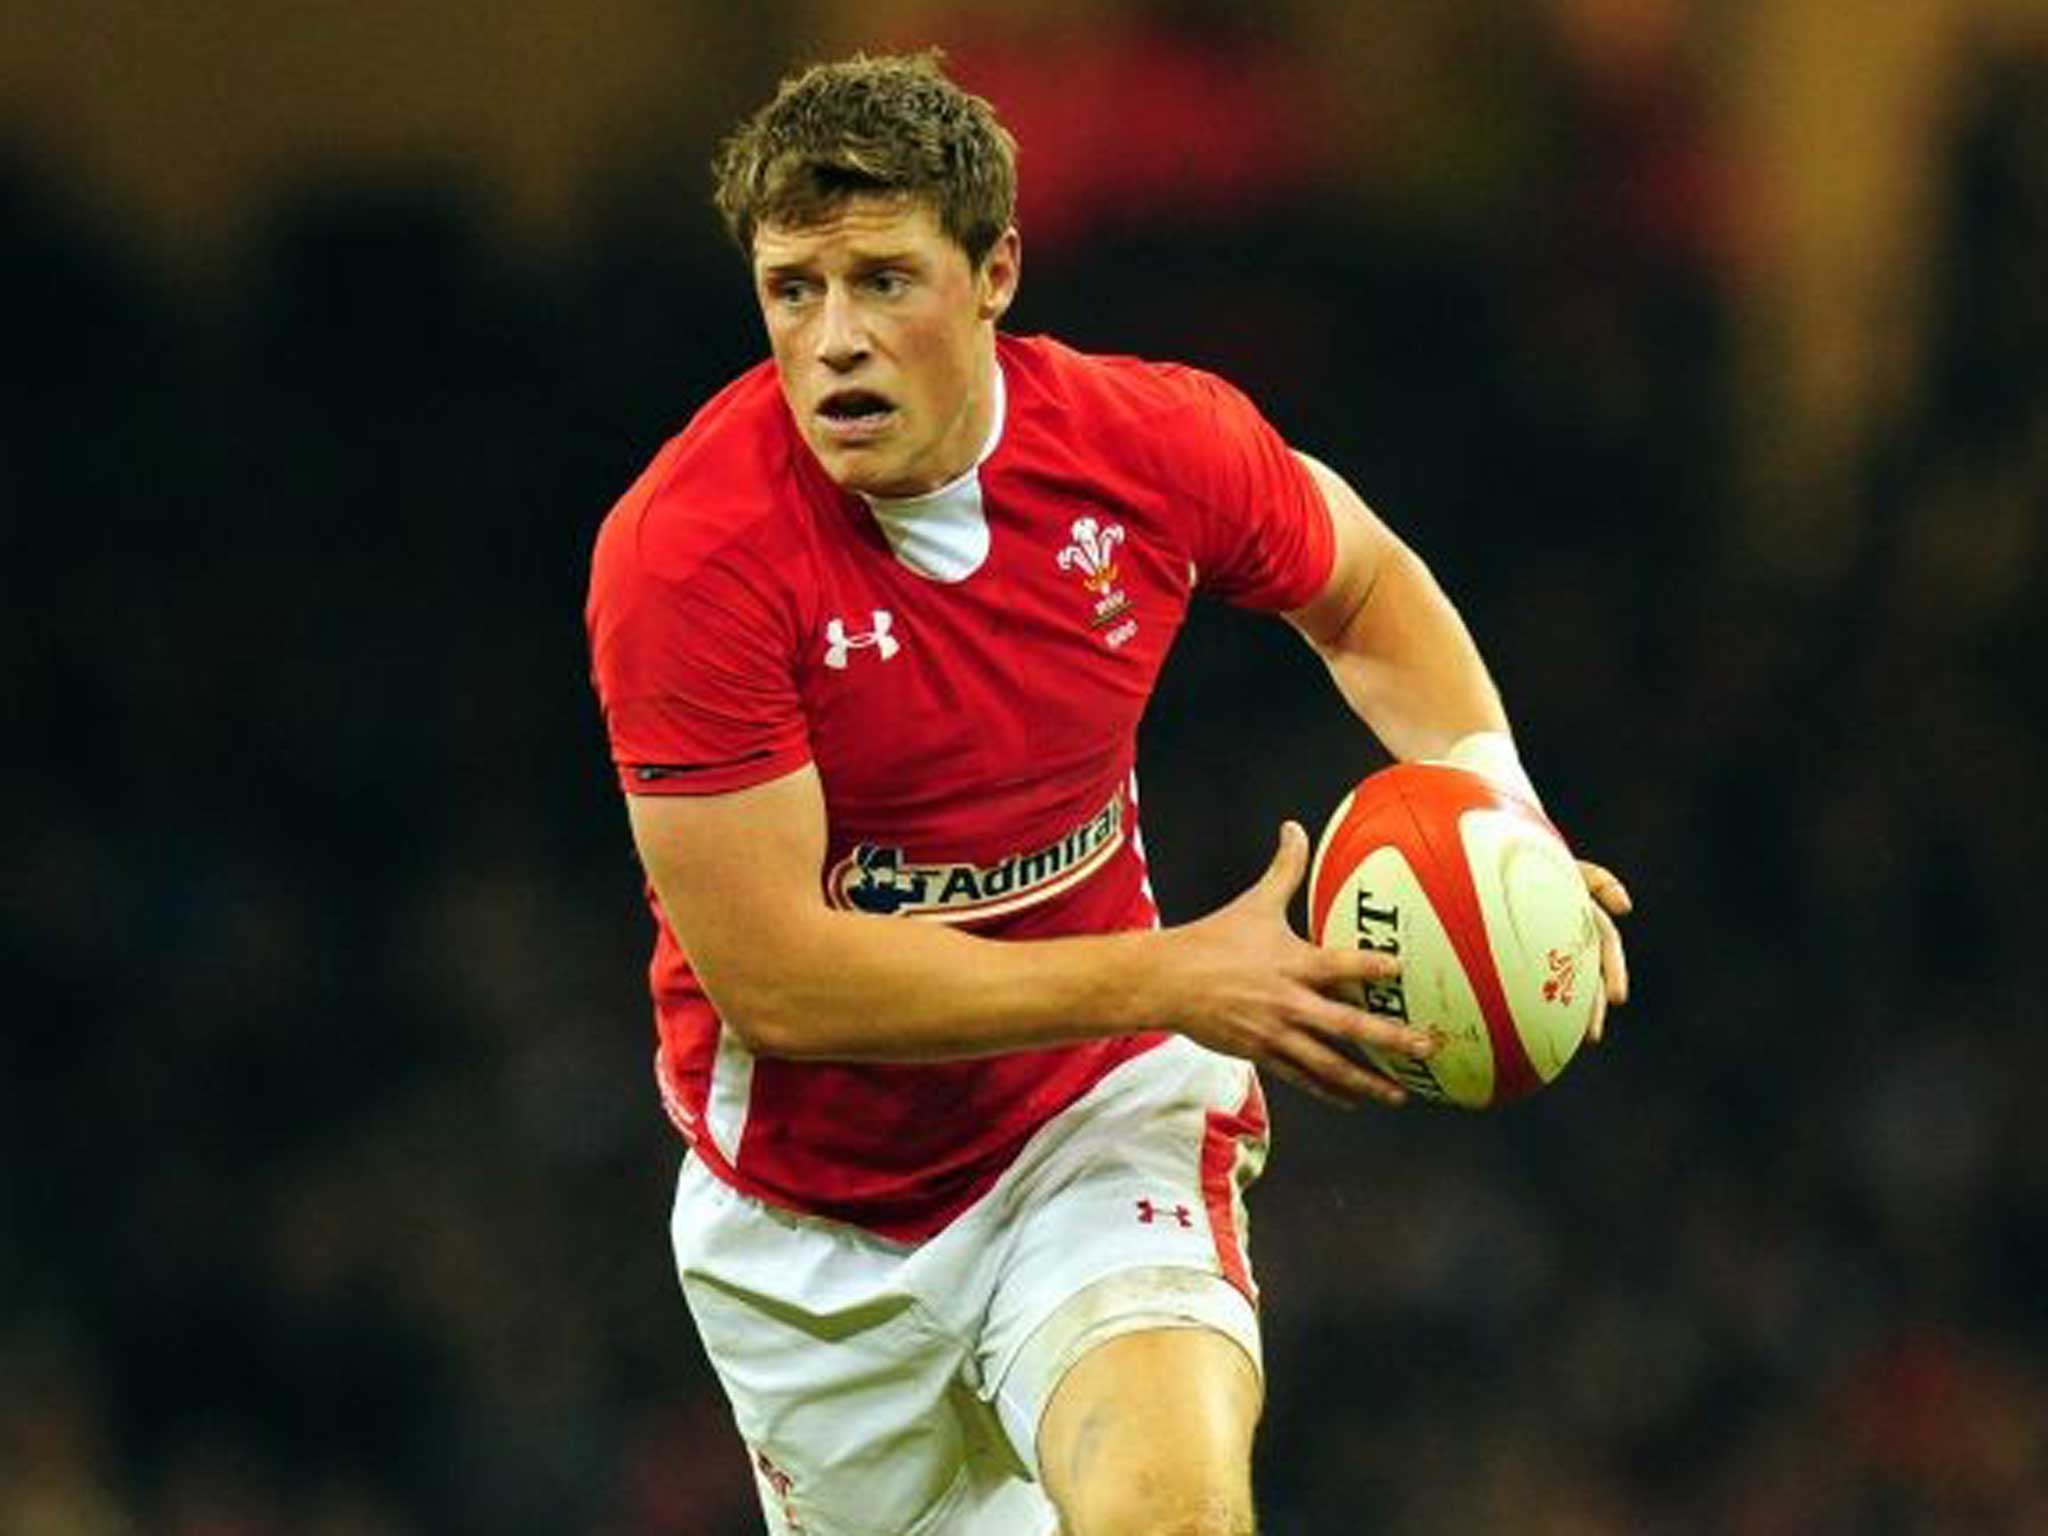 Rhys Priestland is one of those relegated to the bench